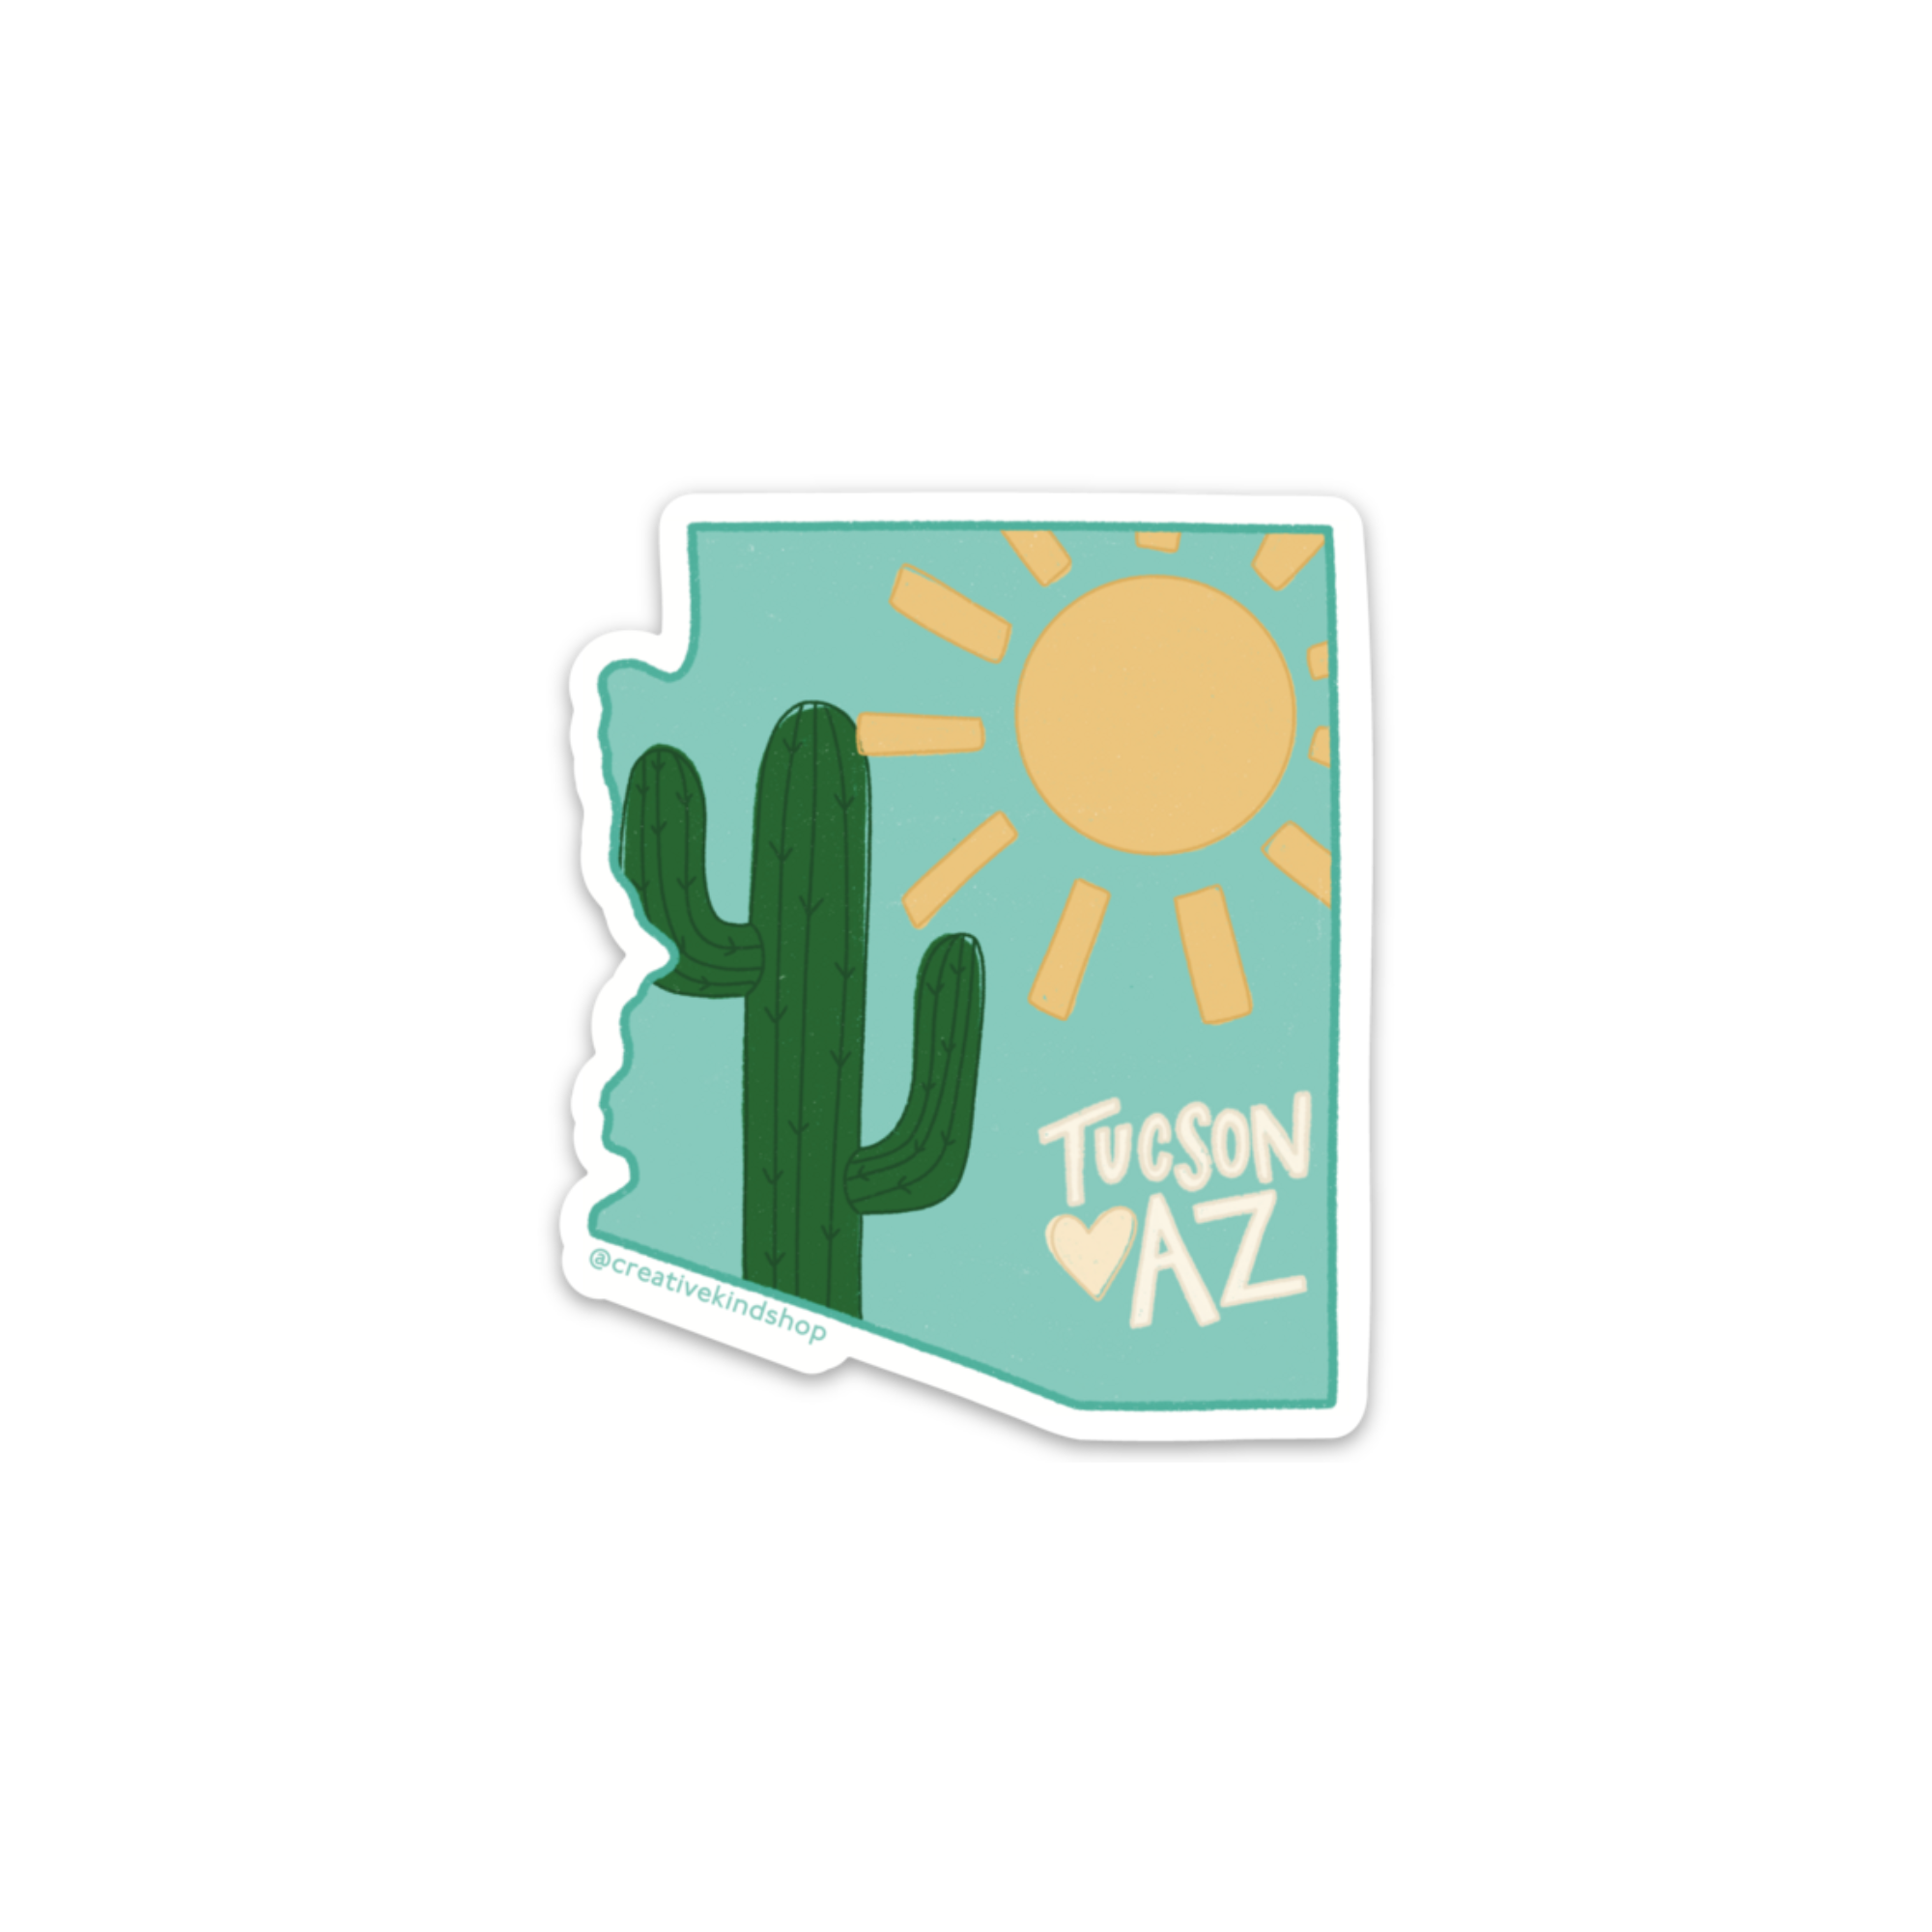 Aqua die cut sticker in the shape of arizona with a sun and saguaro and the words "tucson az" next to a heart over tucson